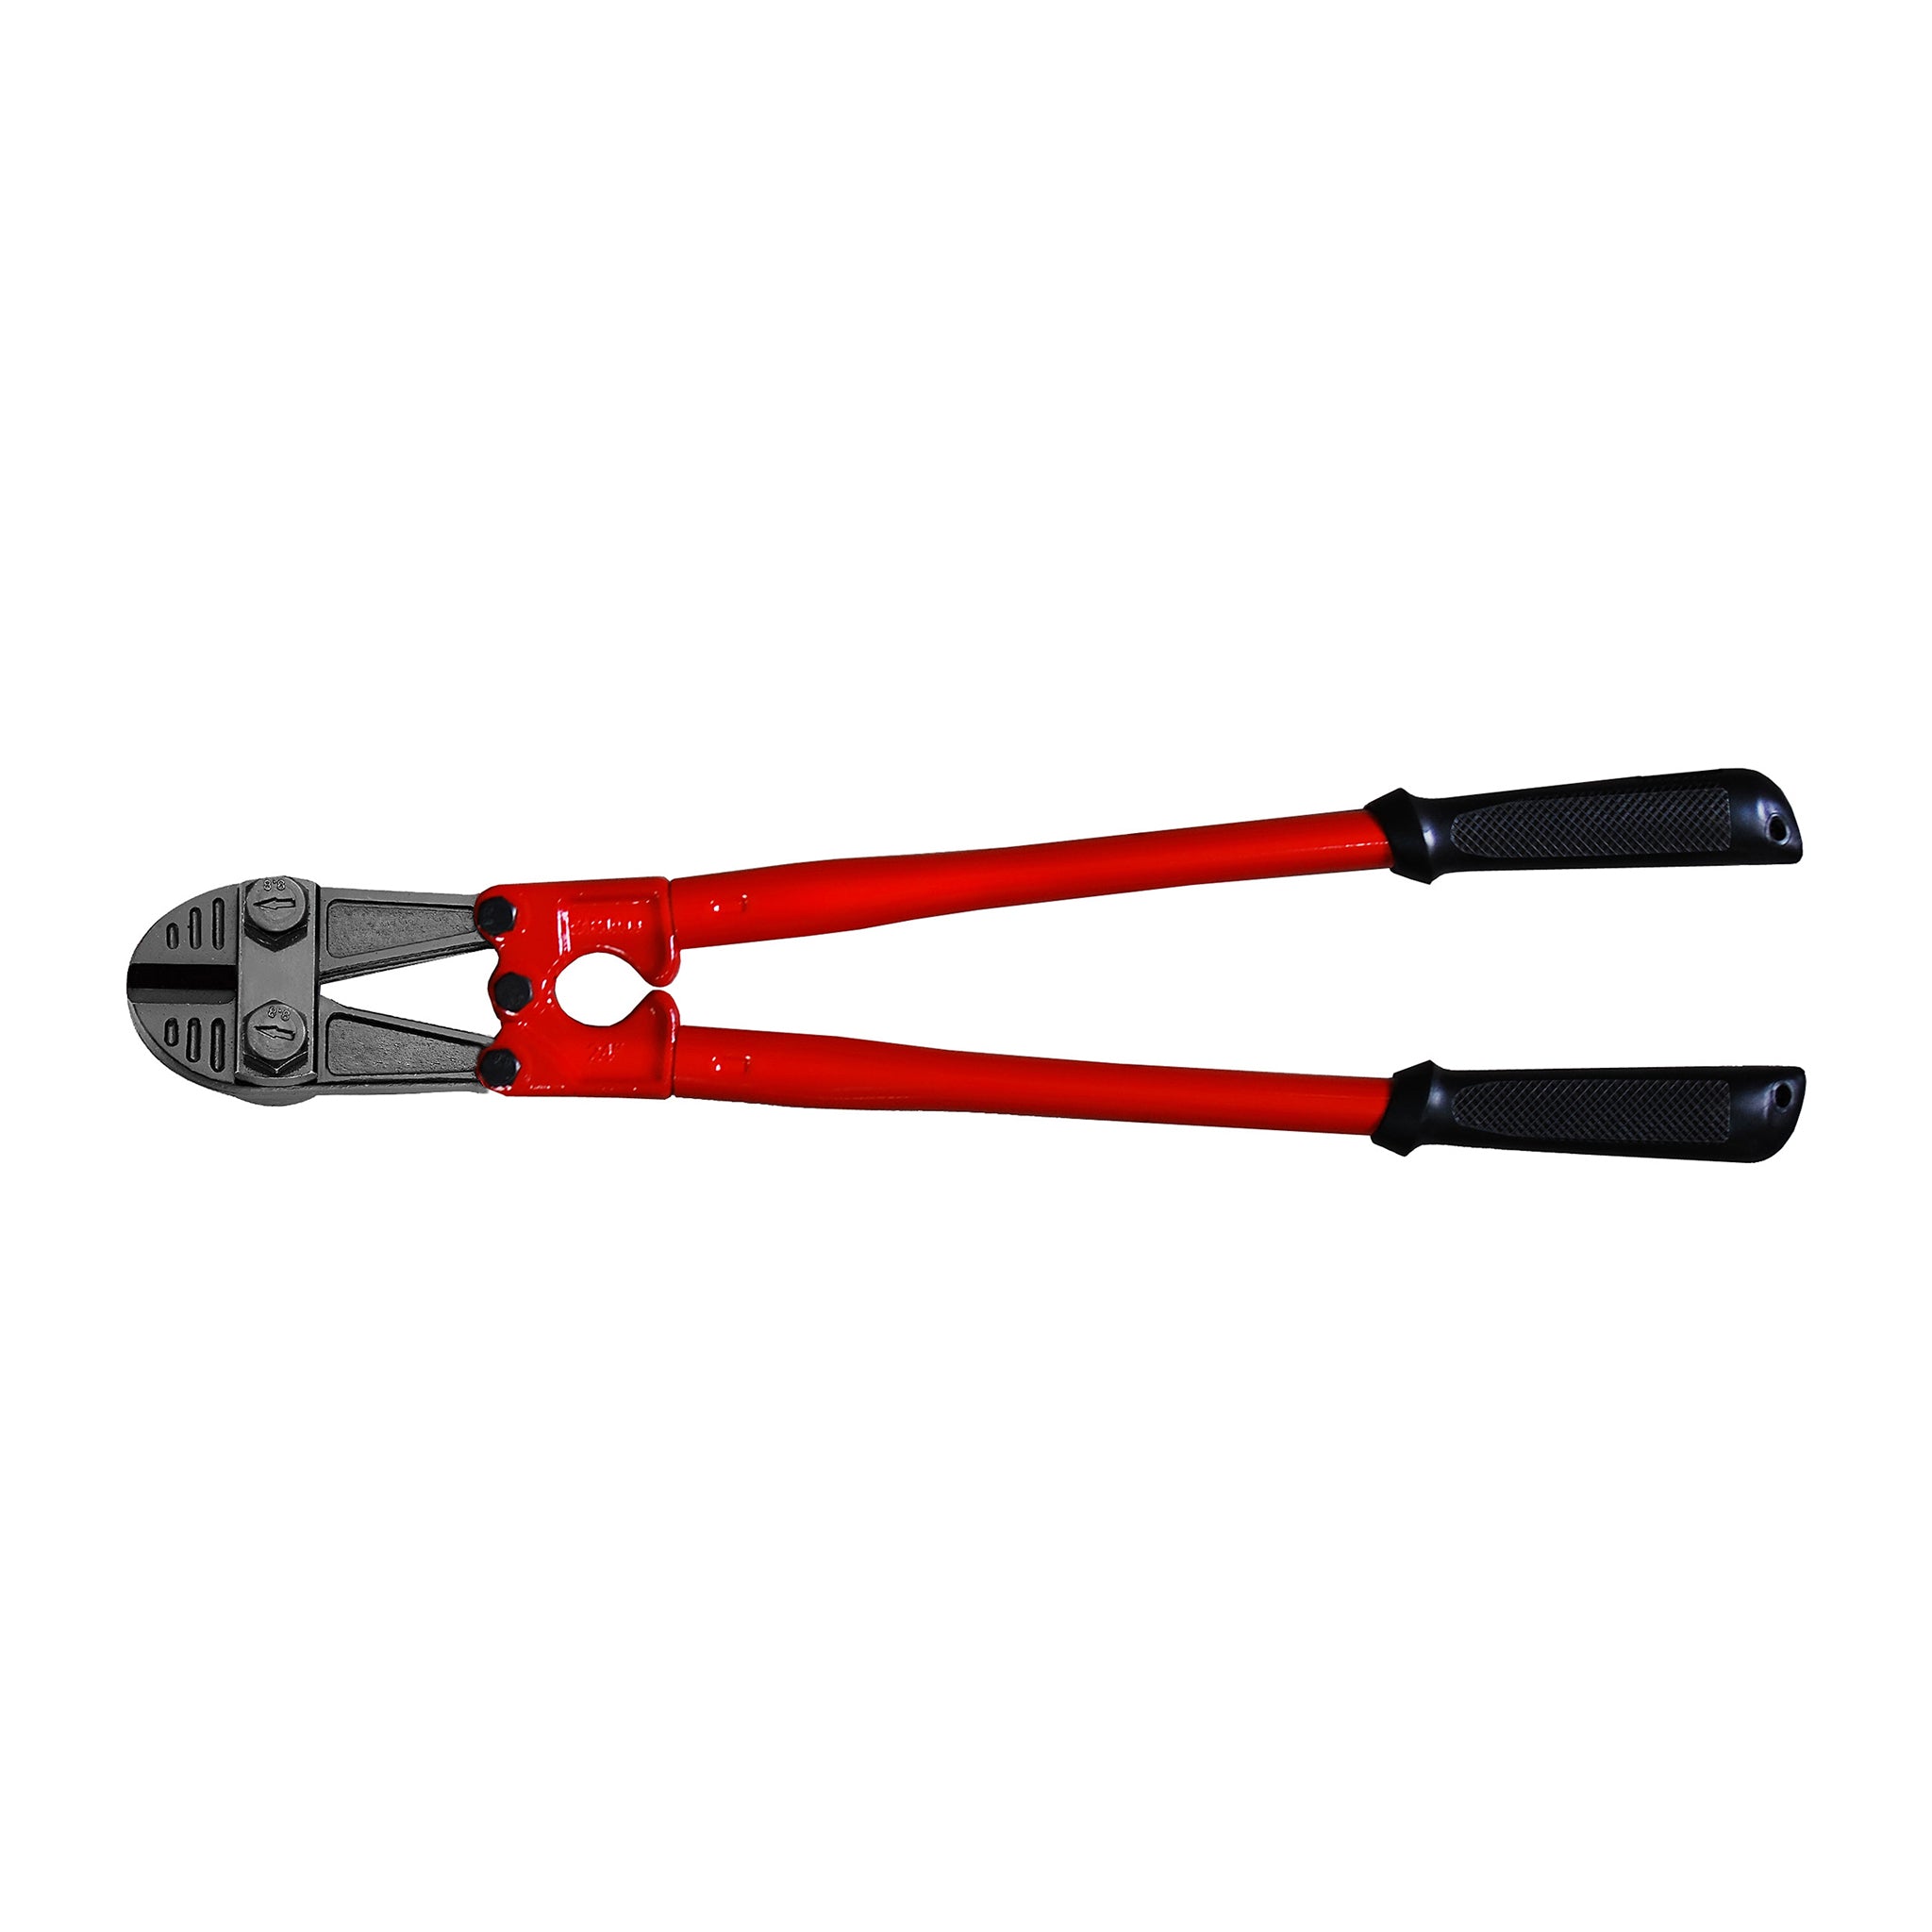 Teng Tools Bolt Cutters With Dipped Handle 8 To 36 Inches - 24 Inch